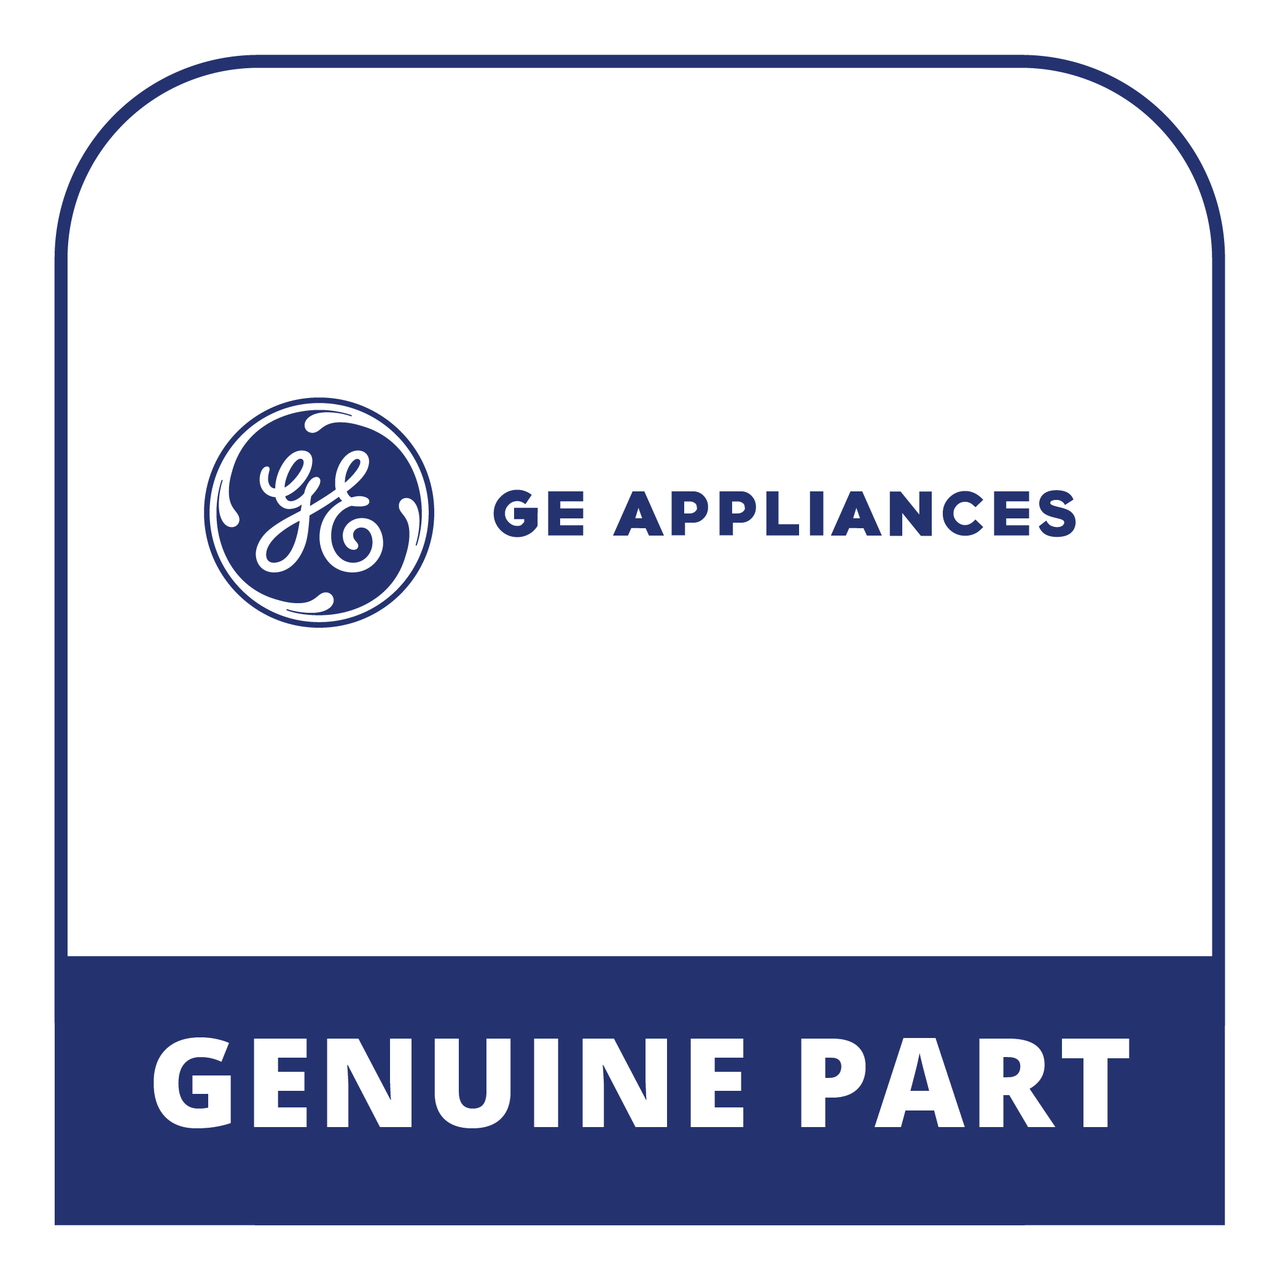 GE Appliances WC01X21040 - Monogram Forge Silicone Ice Mold - Genuine Part